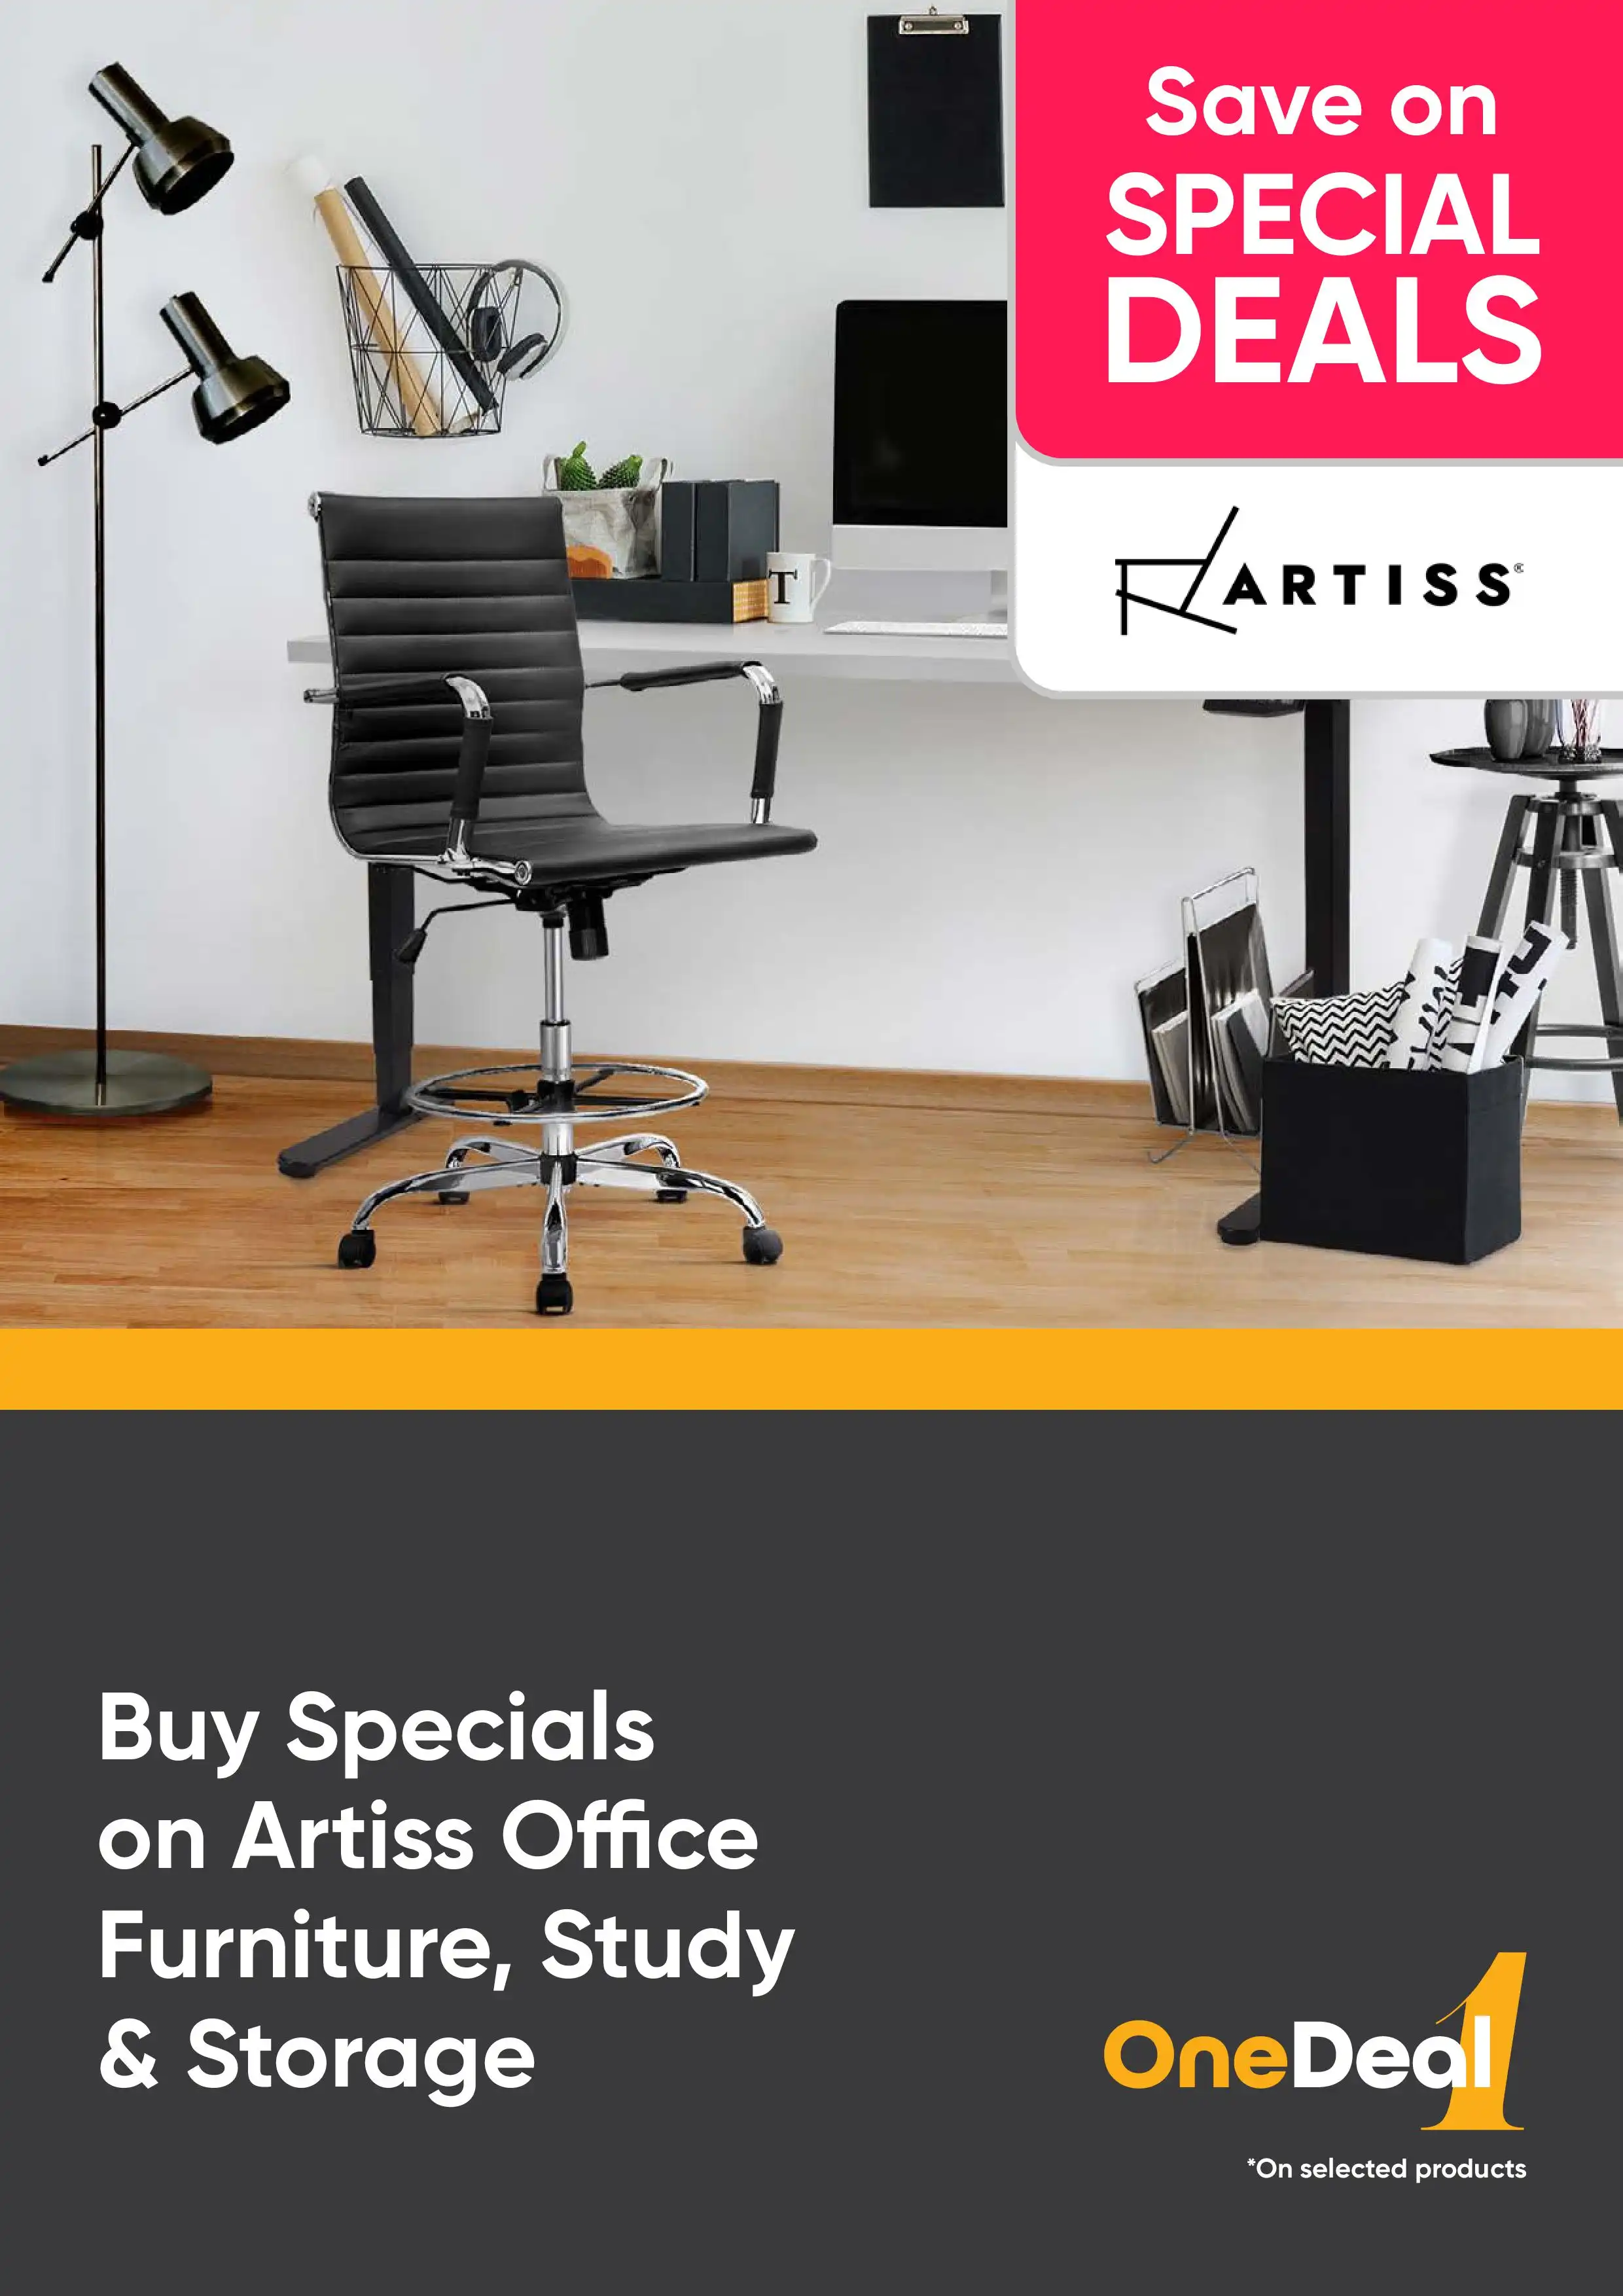 Buy Specials on New Artiss Furniture - Home Office, Living, Kitchen and More